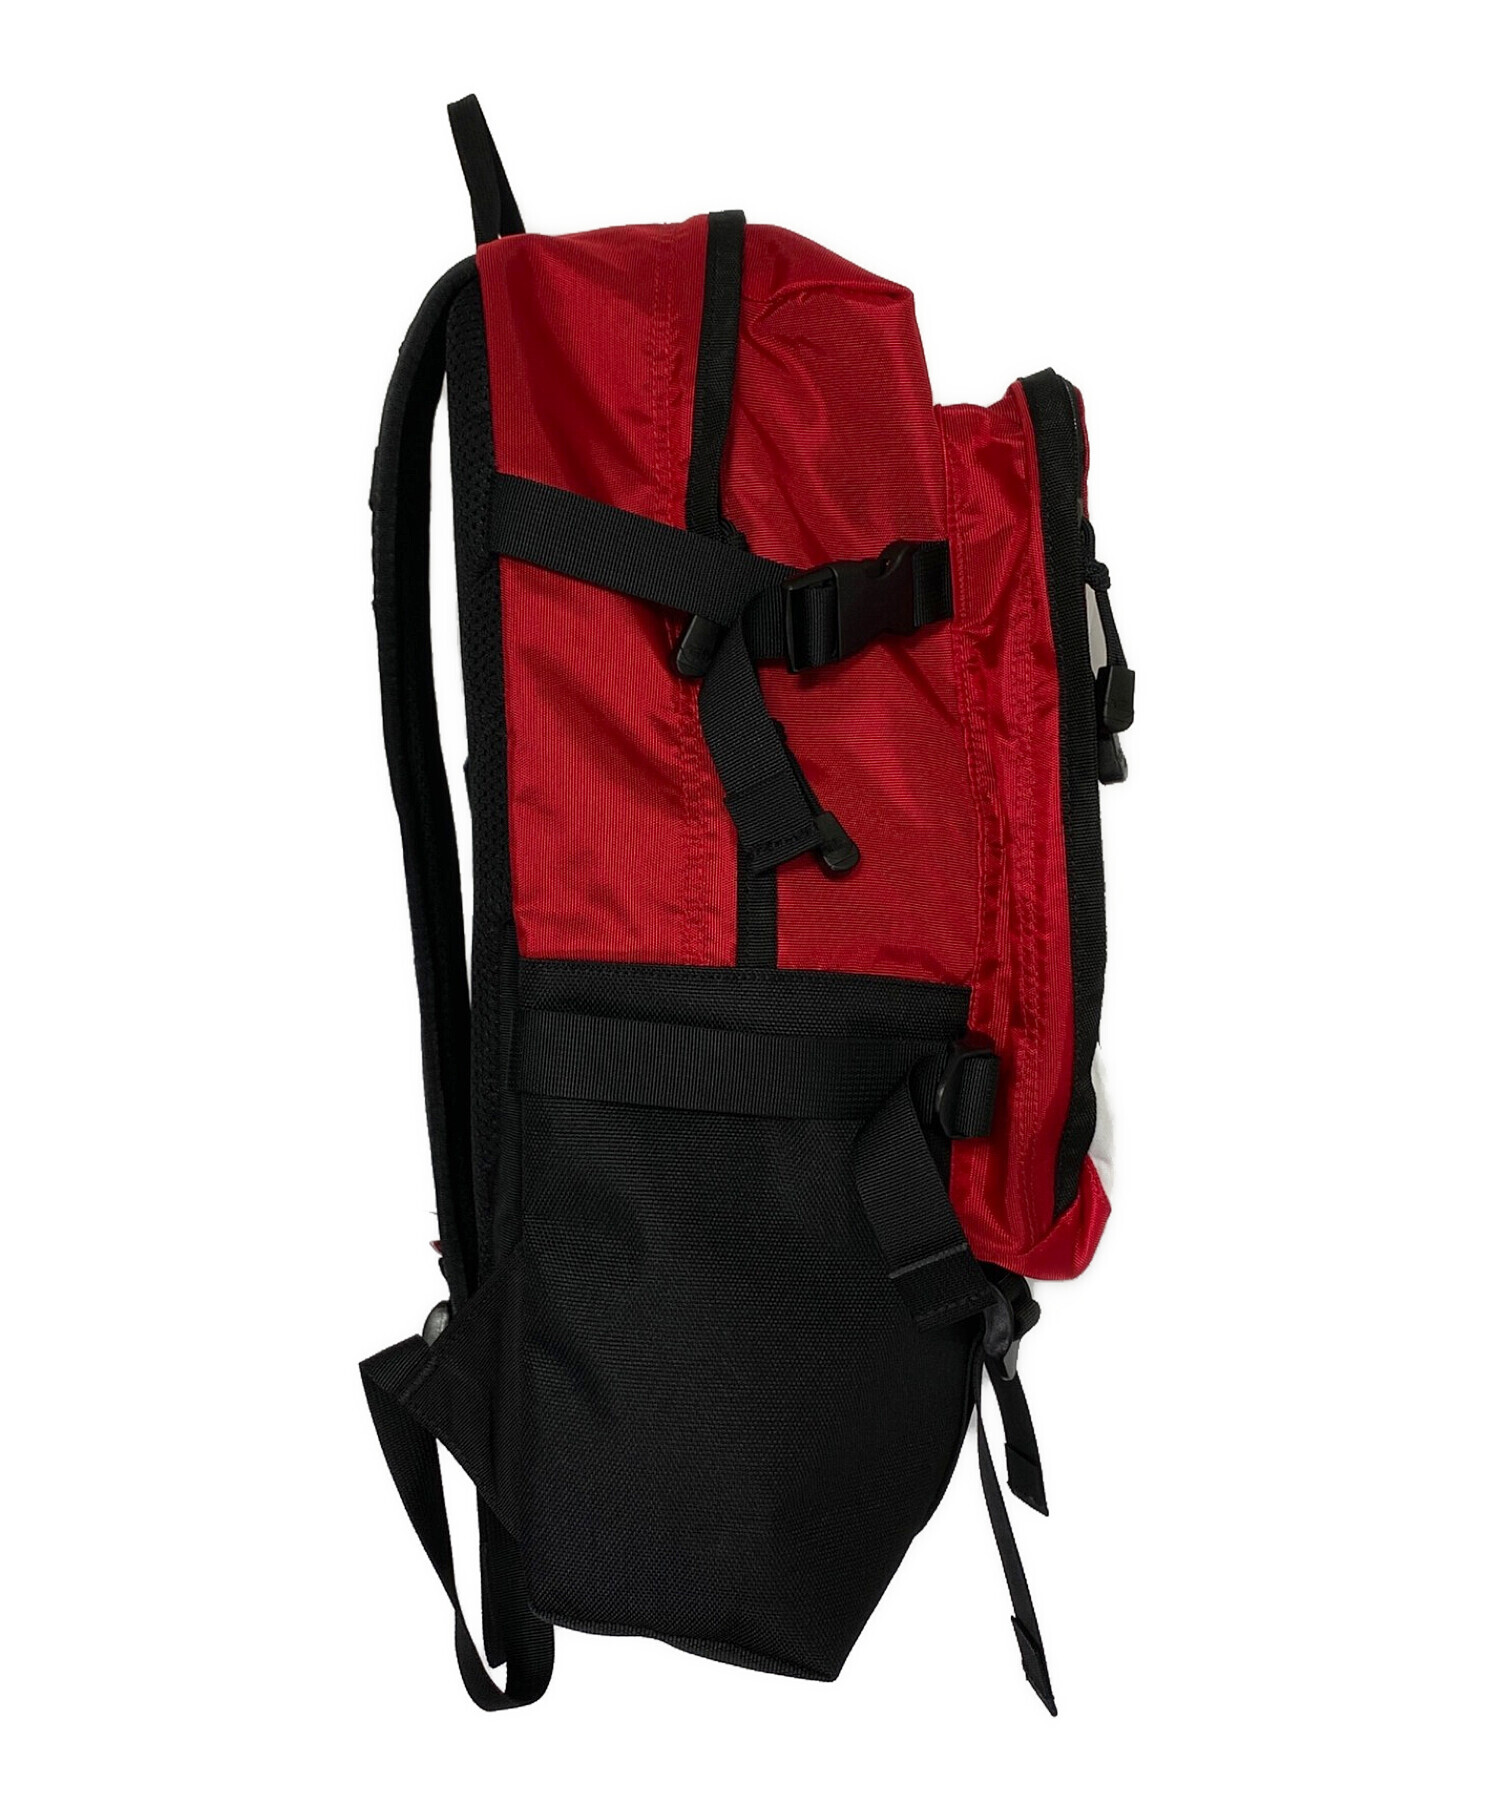 THE NORTH FACE (ザ ノース フェイス) SUPREME (シュプリーム) S Logo Expedition Backpack レッド